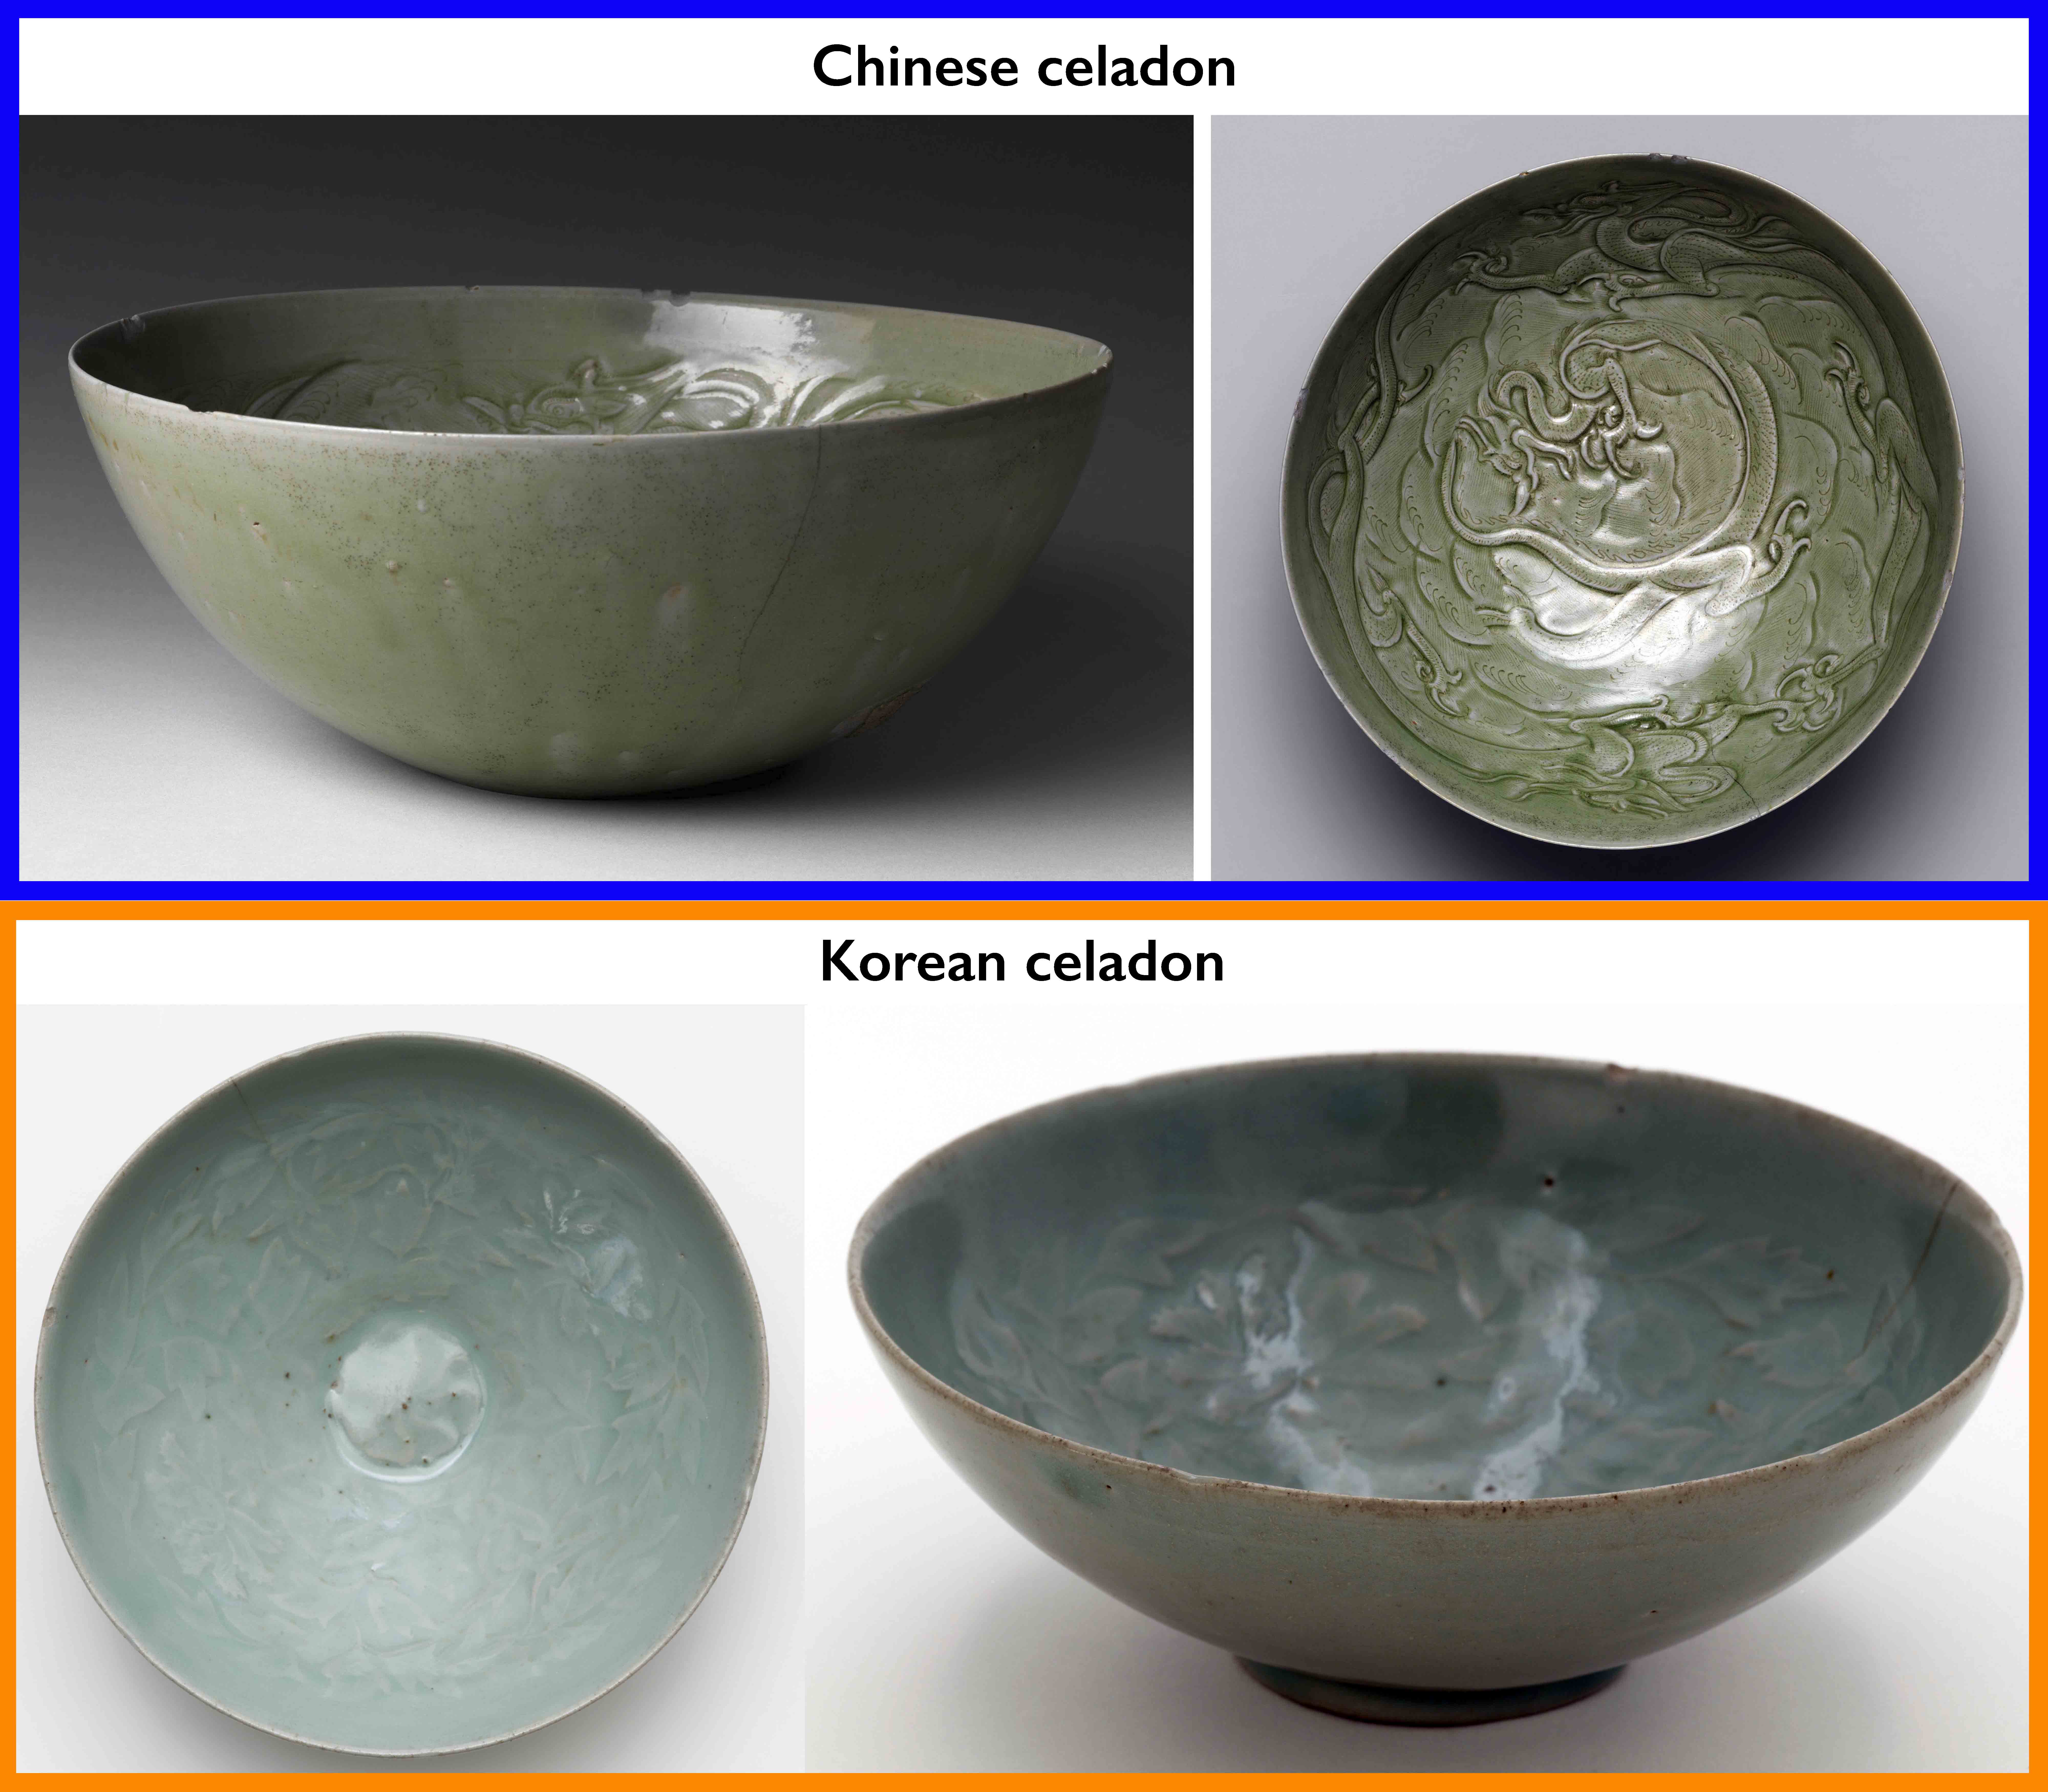 Top: Bowl with Dragons among Waves, China, Five Dynasties, 907–960, 10th century, Stoneware with incised decoration under celadon glaze, Mouth D. 27 cm (The Metropolitan Museum of Art); bottom: Bowl with molded decoration of peony blossoms, Korea, Goryeo Dynasty, 918–1392, mid-12th century, Stoneware with celadon glaze, H x W: 6.5 x 18.1 cm (National Museum of Asian Art)